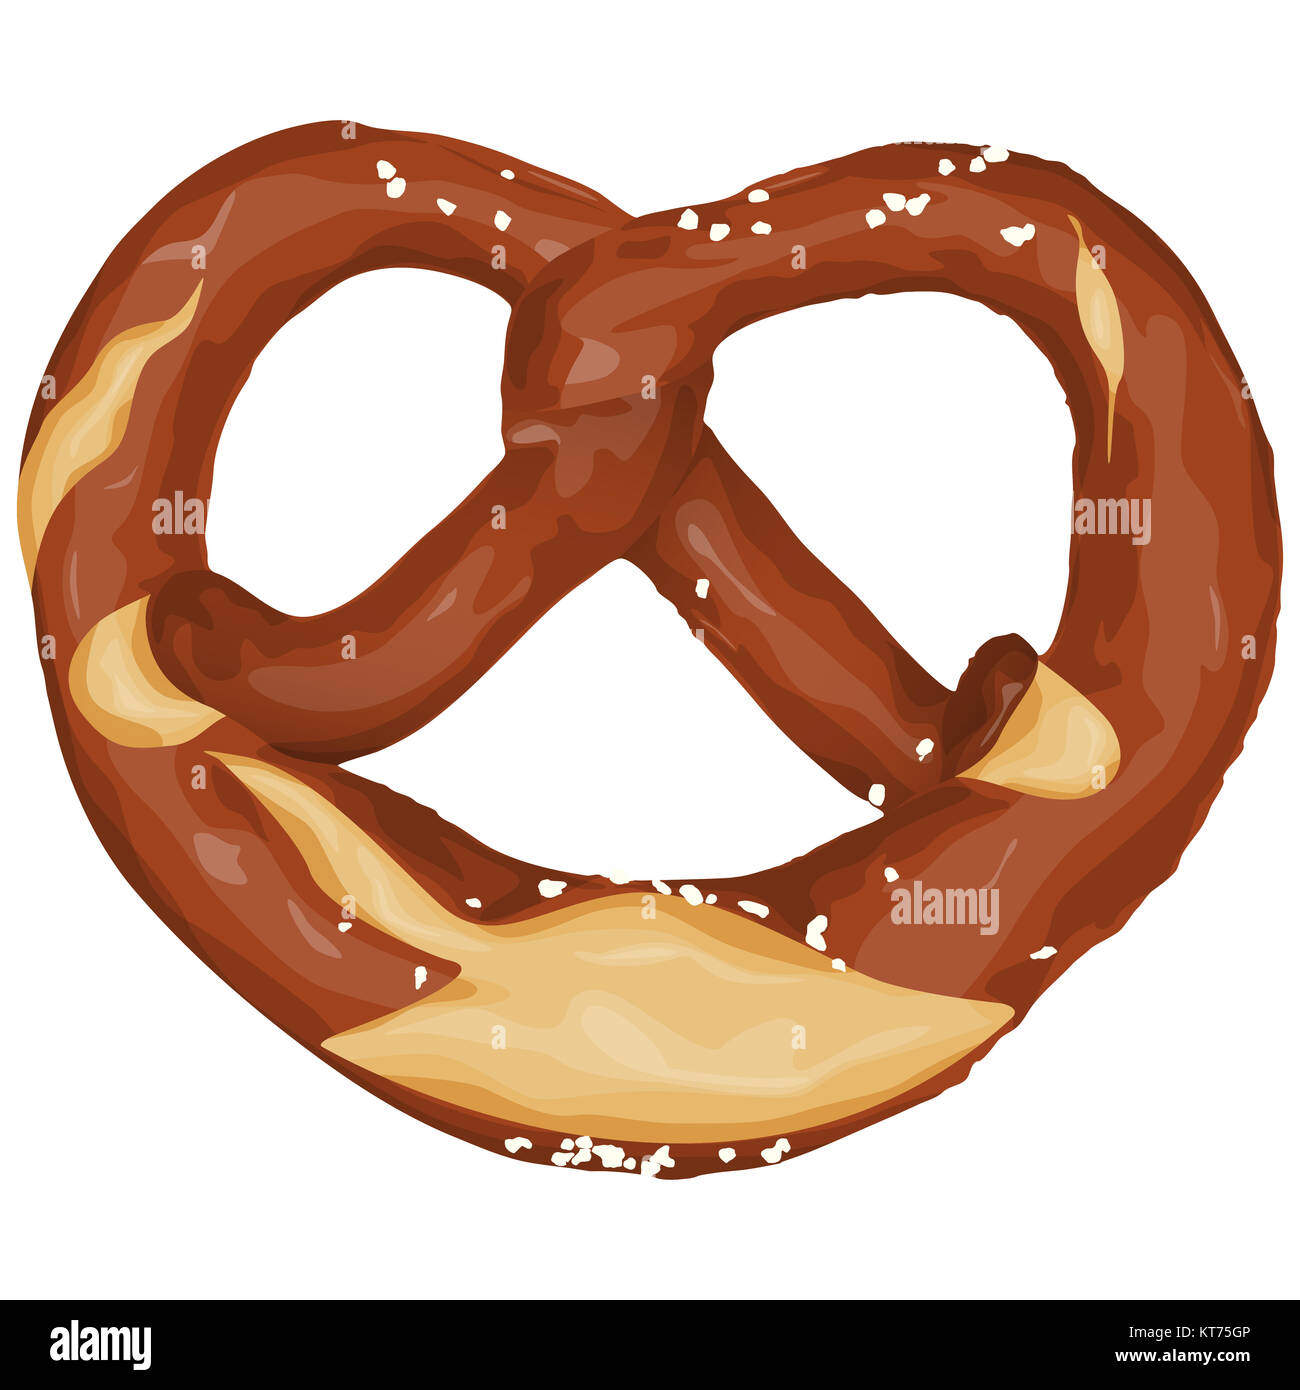 vector illustration of an brown bavarian pretzel isolated on white background Stock Photo